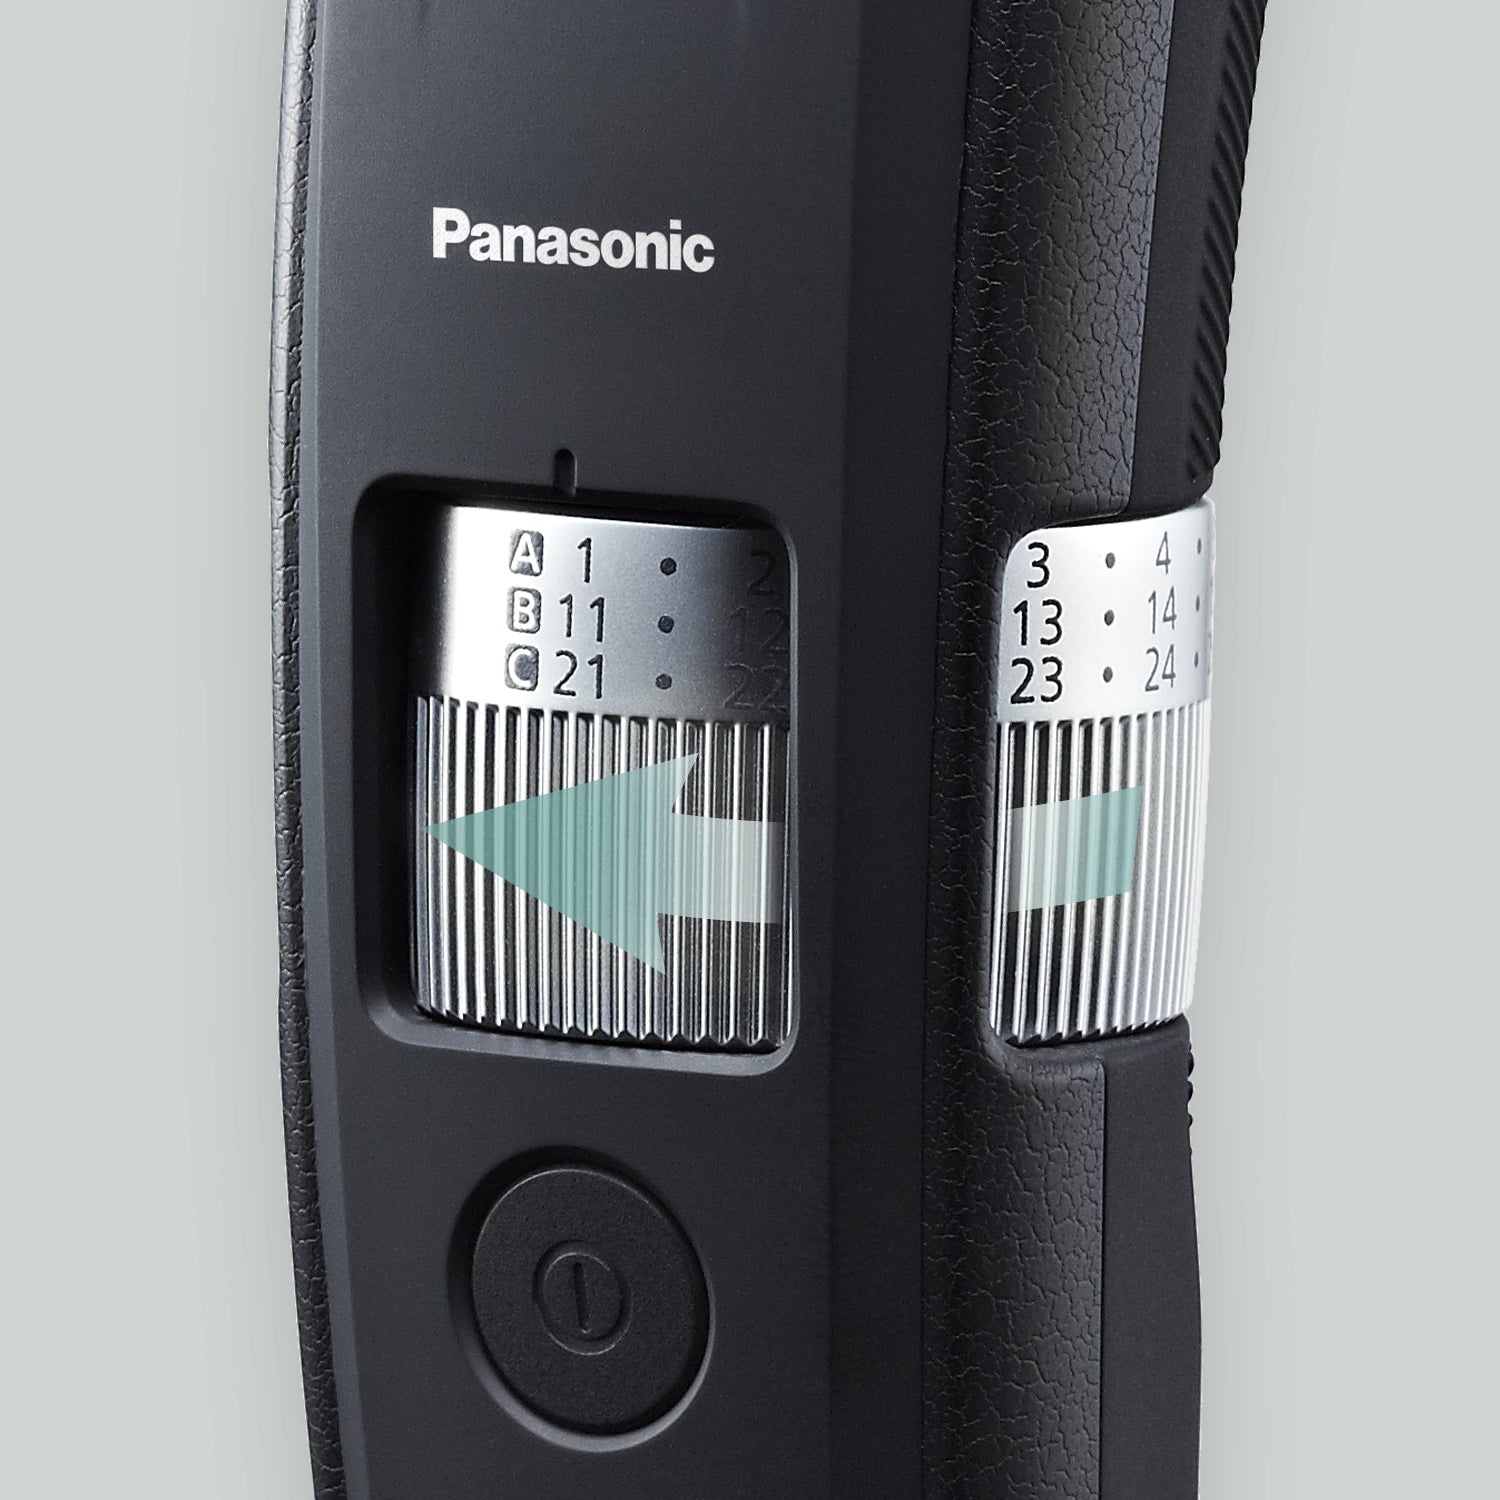 Panasonic Long Beard Hair 58 - ER-GB96-K 4 Comb Trimmer and Length Adjustable Attachments with Settings